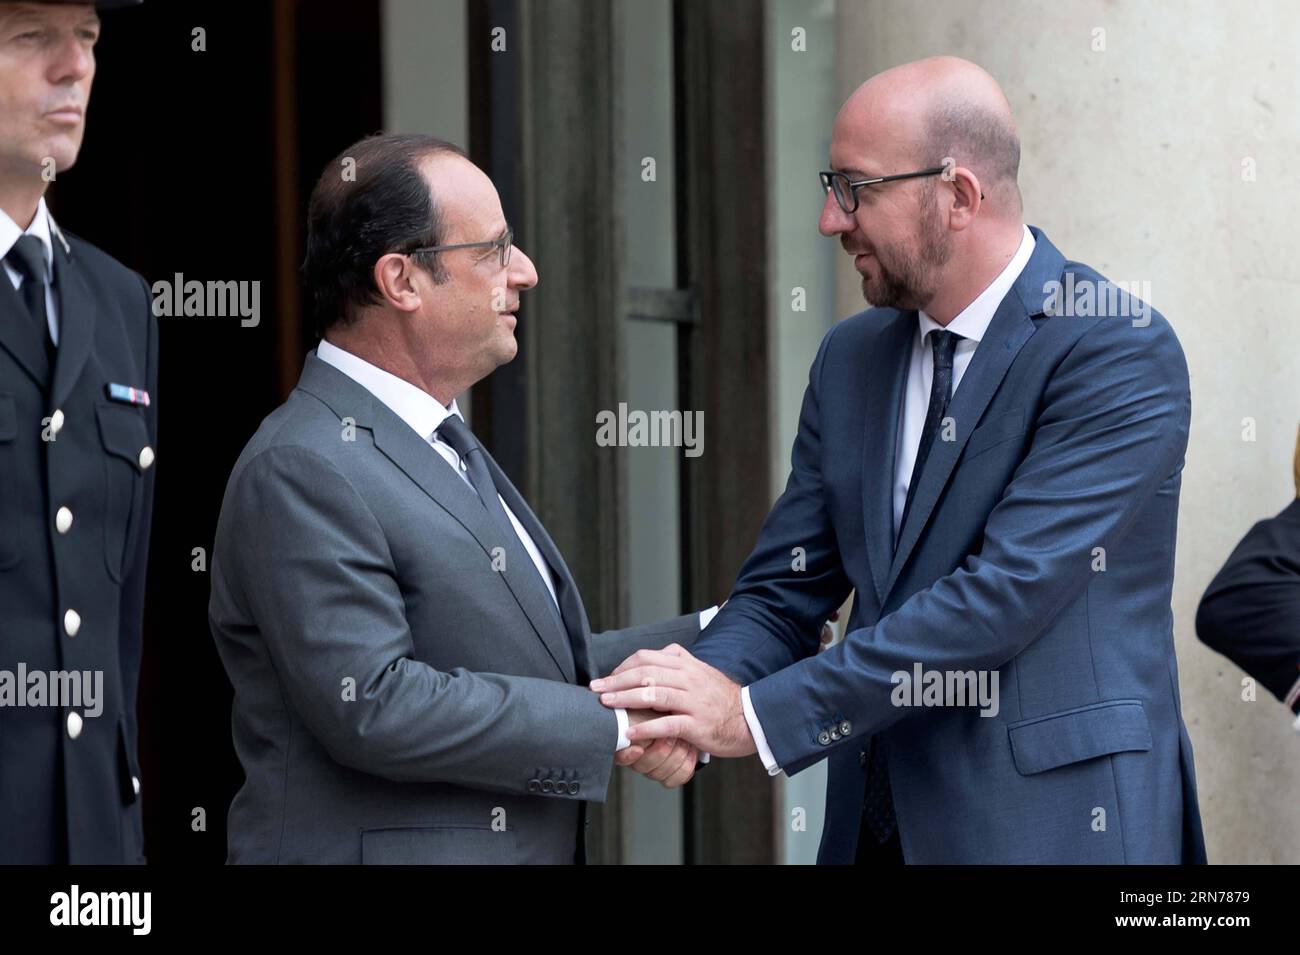 (150824) -- PARIS, Aug. 24, 2015 -- French President Francois Hollande (L) welcomes Belgian Prime Minister Charles Michel upon his arrival at the Elysee Palace in Paris, France, Aug. 24, 2015. French President Francois Hollande on Monday awarded France s highest honor, the Legion d honneur, to three U.S. men, Alek Skarlatos, Spencer Stone and Anthony Sadler and Briton Chris Norman who helped neutralize a shooter at Thalys high-speed train between Amsterdam and Paris last week. ) (zjy) FRENCH-PARIS-AWARD-LEGION D HONNEUR AndyxLouis PUBLICATIONxNOTxINxCHN   150824 Paris Aug 24 2015 French Presid Stock Photo